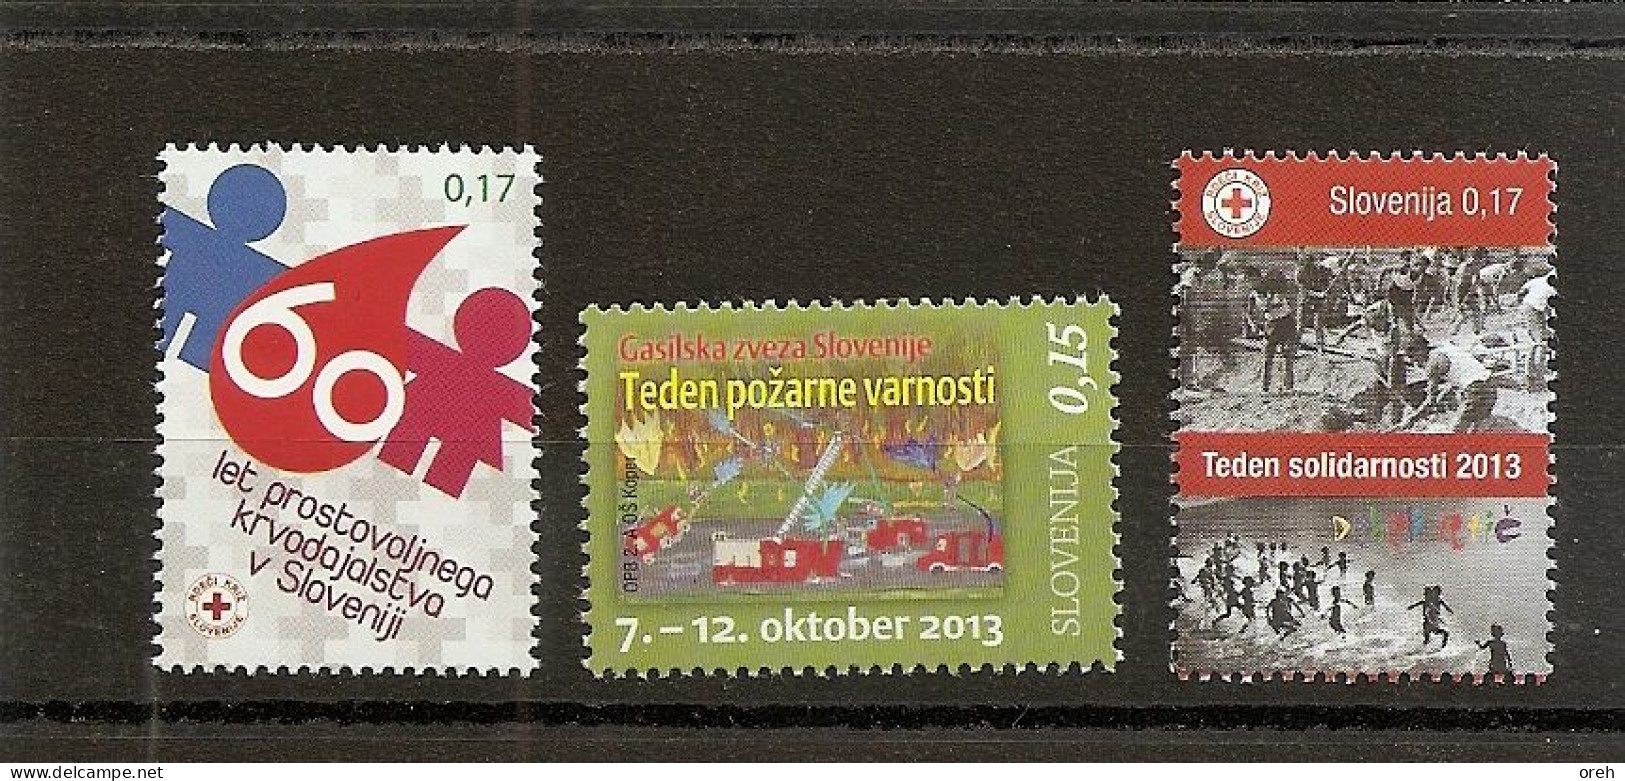 SLOVENIA  2013, RED CROSS,SOLIDARITY,,ADHESIVE,COMPLETE,MNH - Slovenia